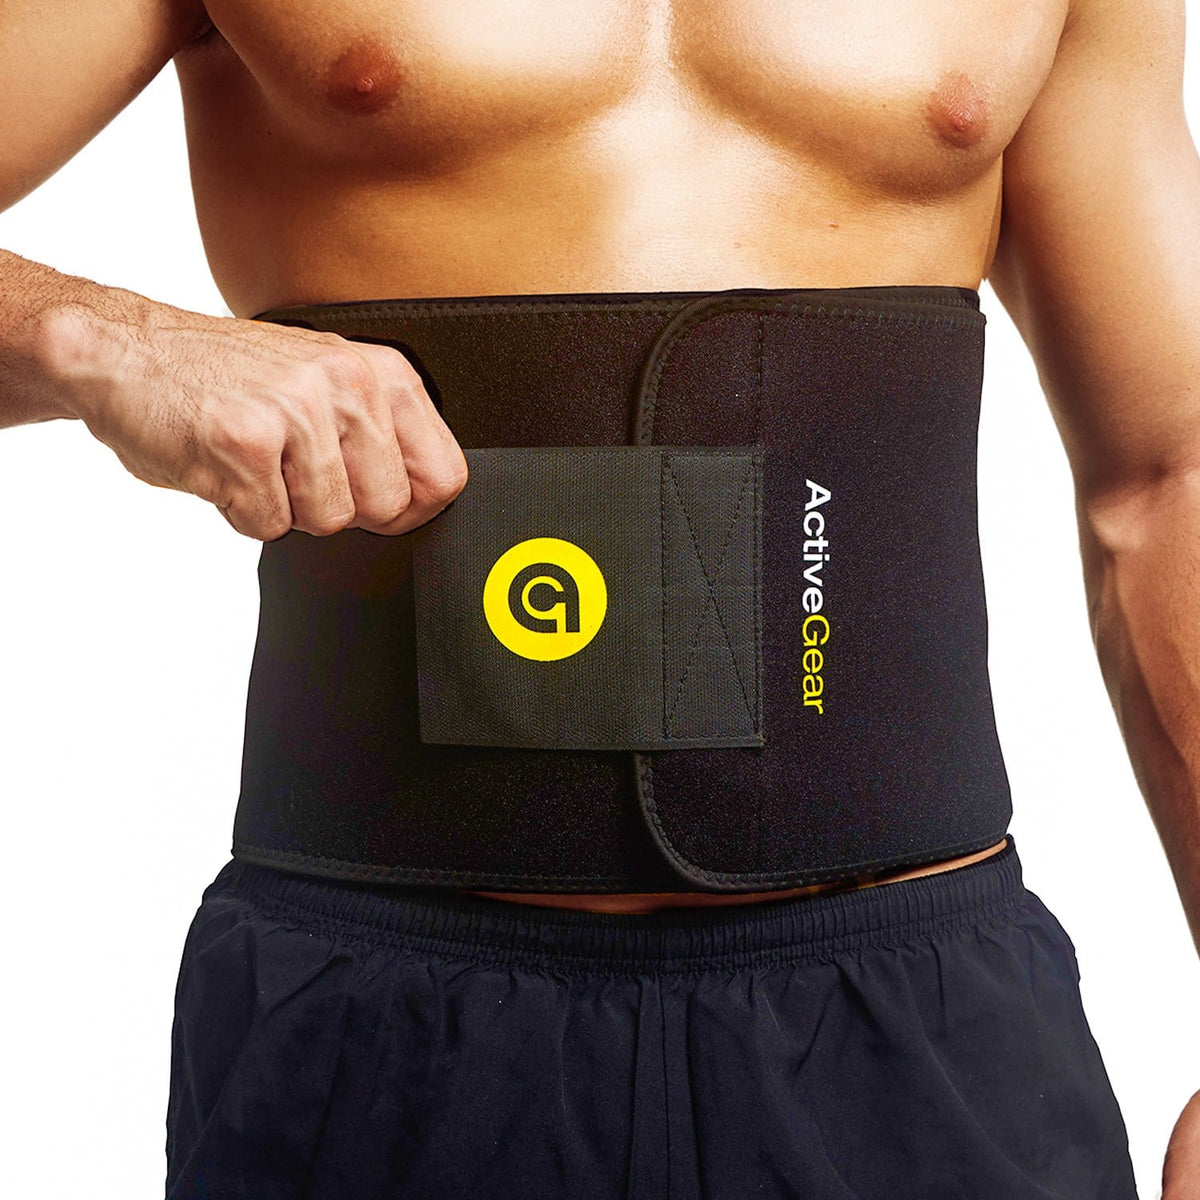 ActiveGear Premium Waist Trainers For Men and Women. Get your Sweat on